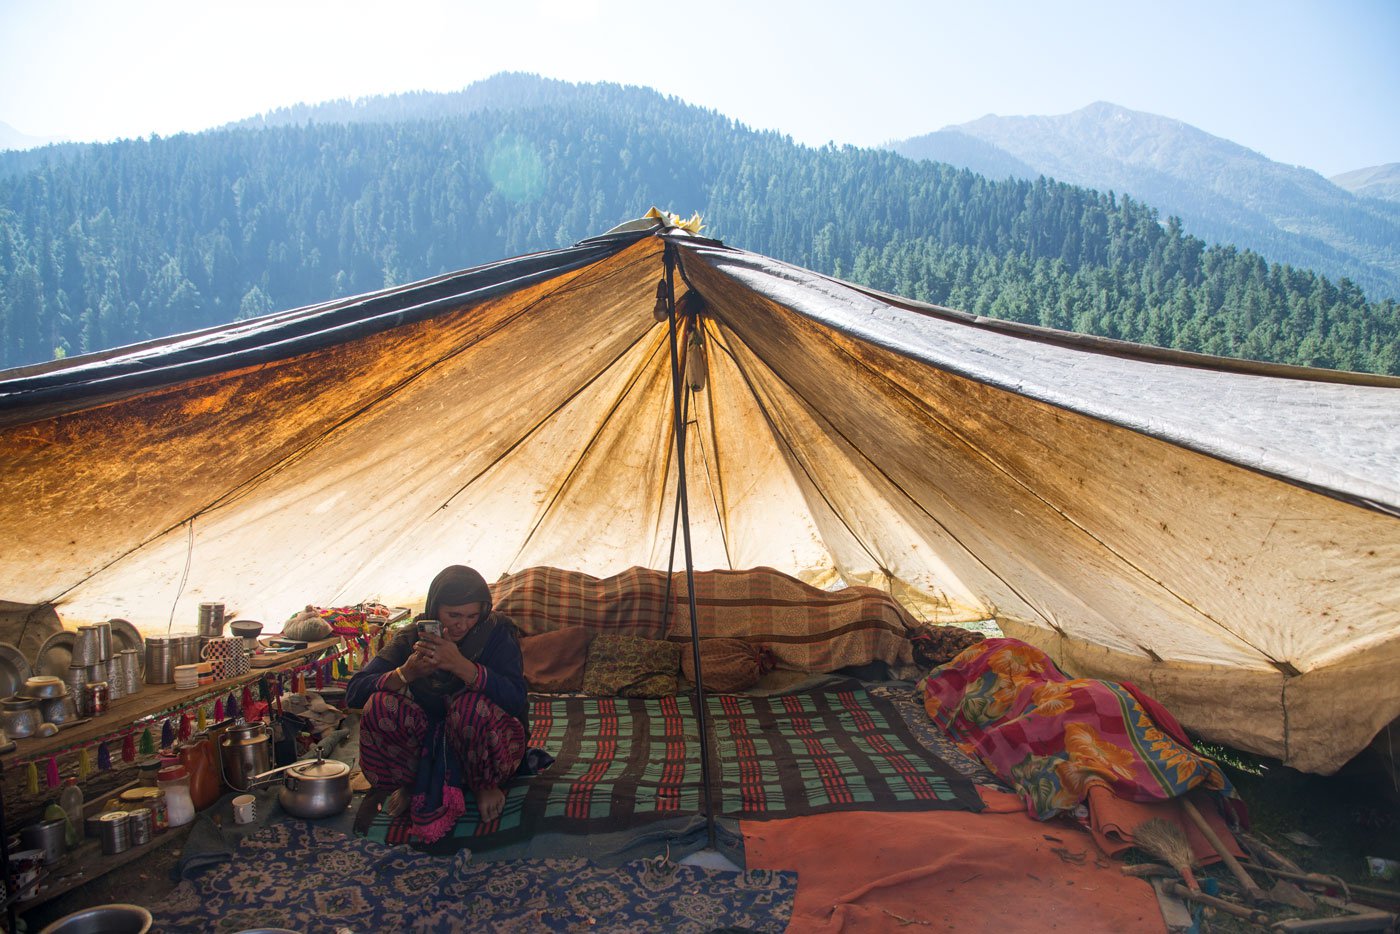 Meena Akhtar recently gave birth. Her newborn stays in this tent made of patched-up tarpaulin and in need of repair